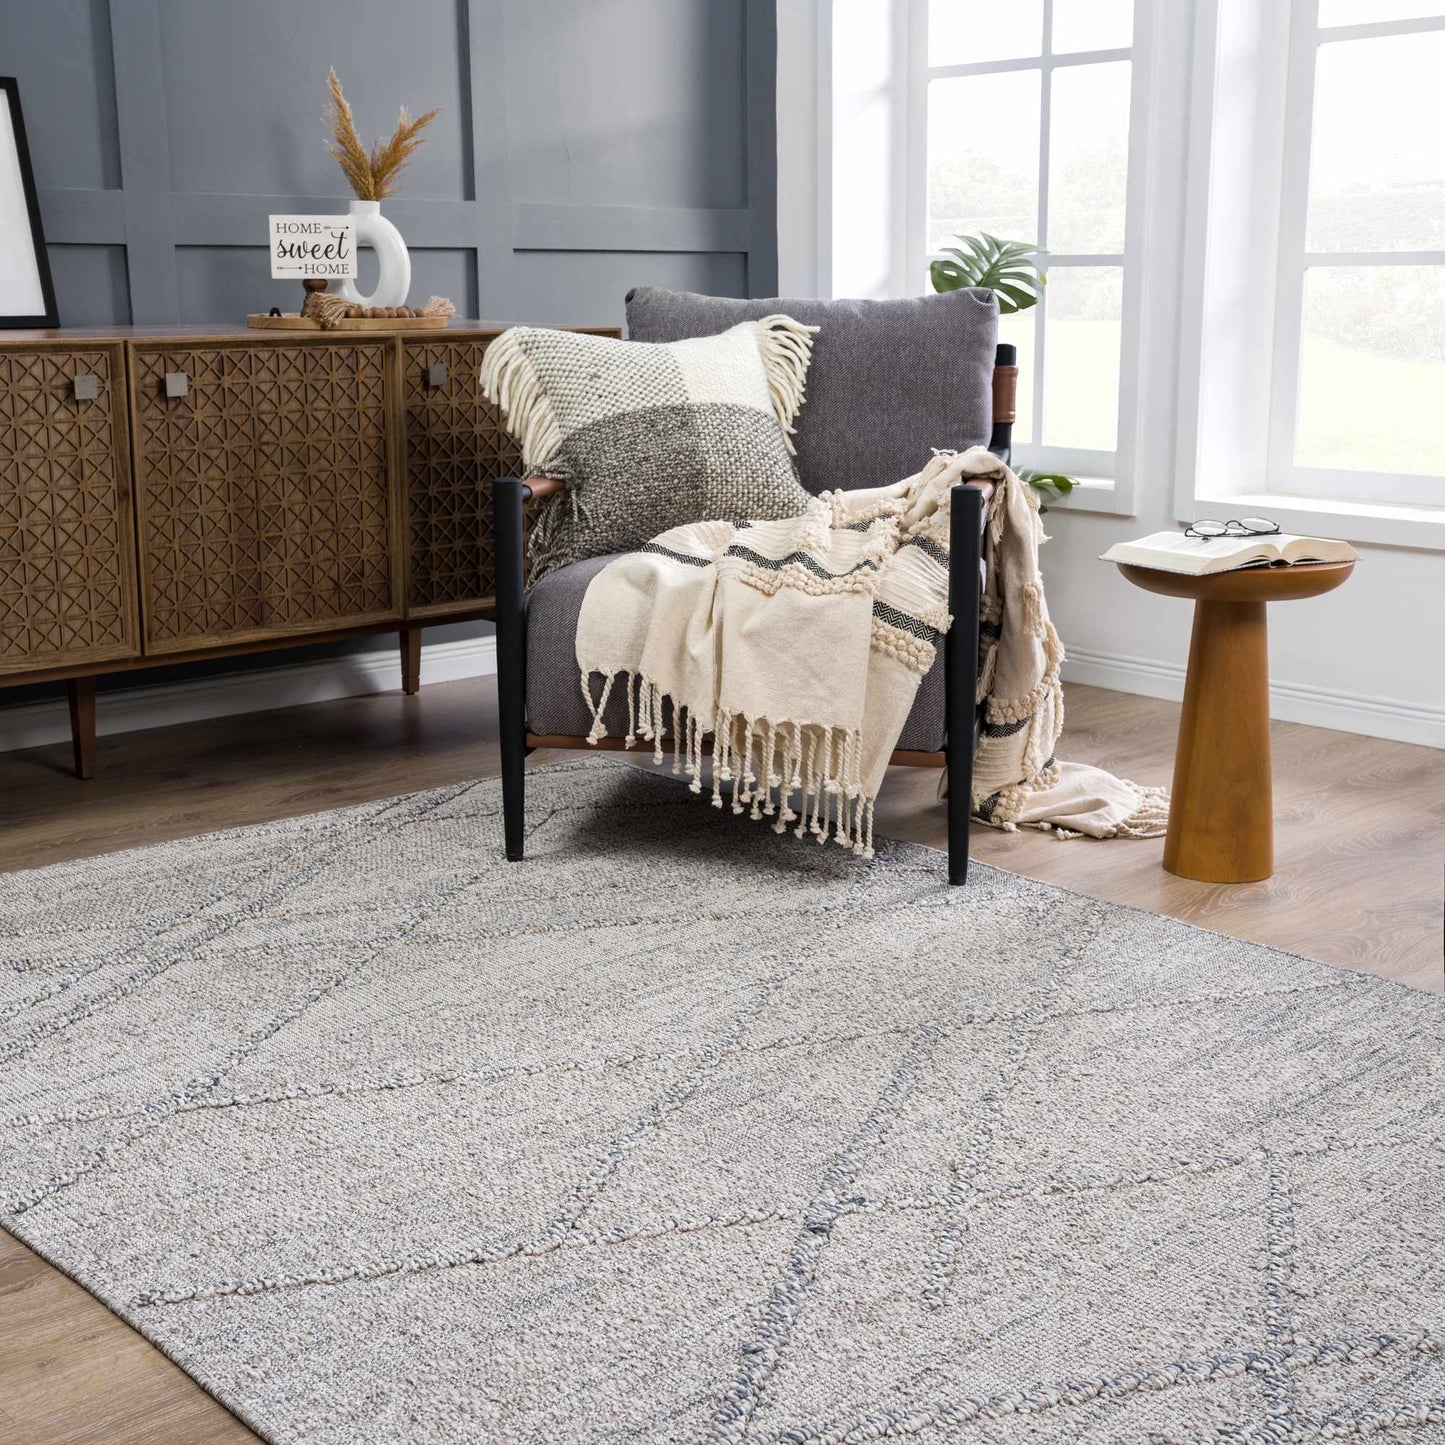 Baqer Taupe & Gray Area Rug